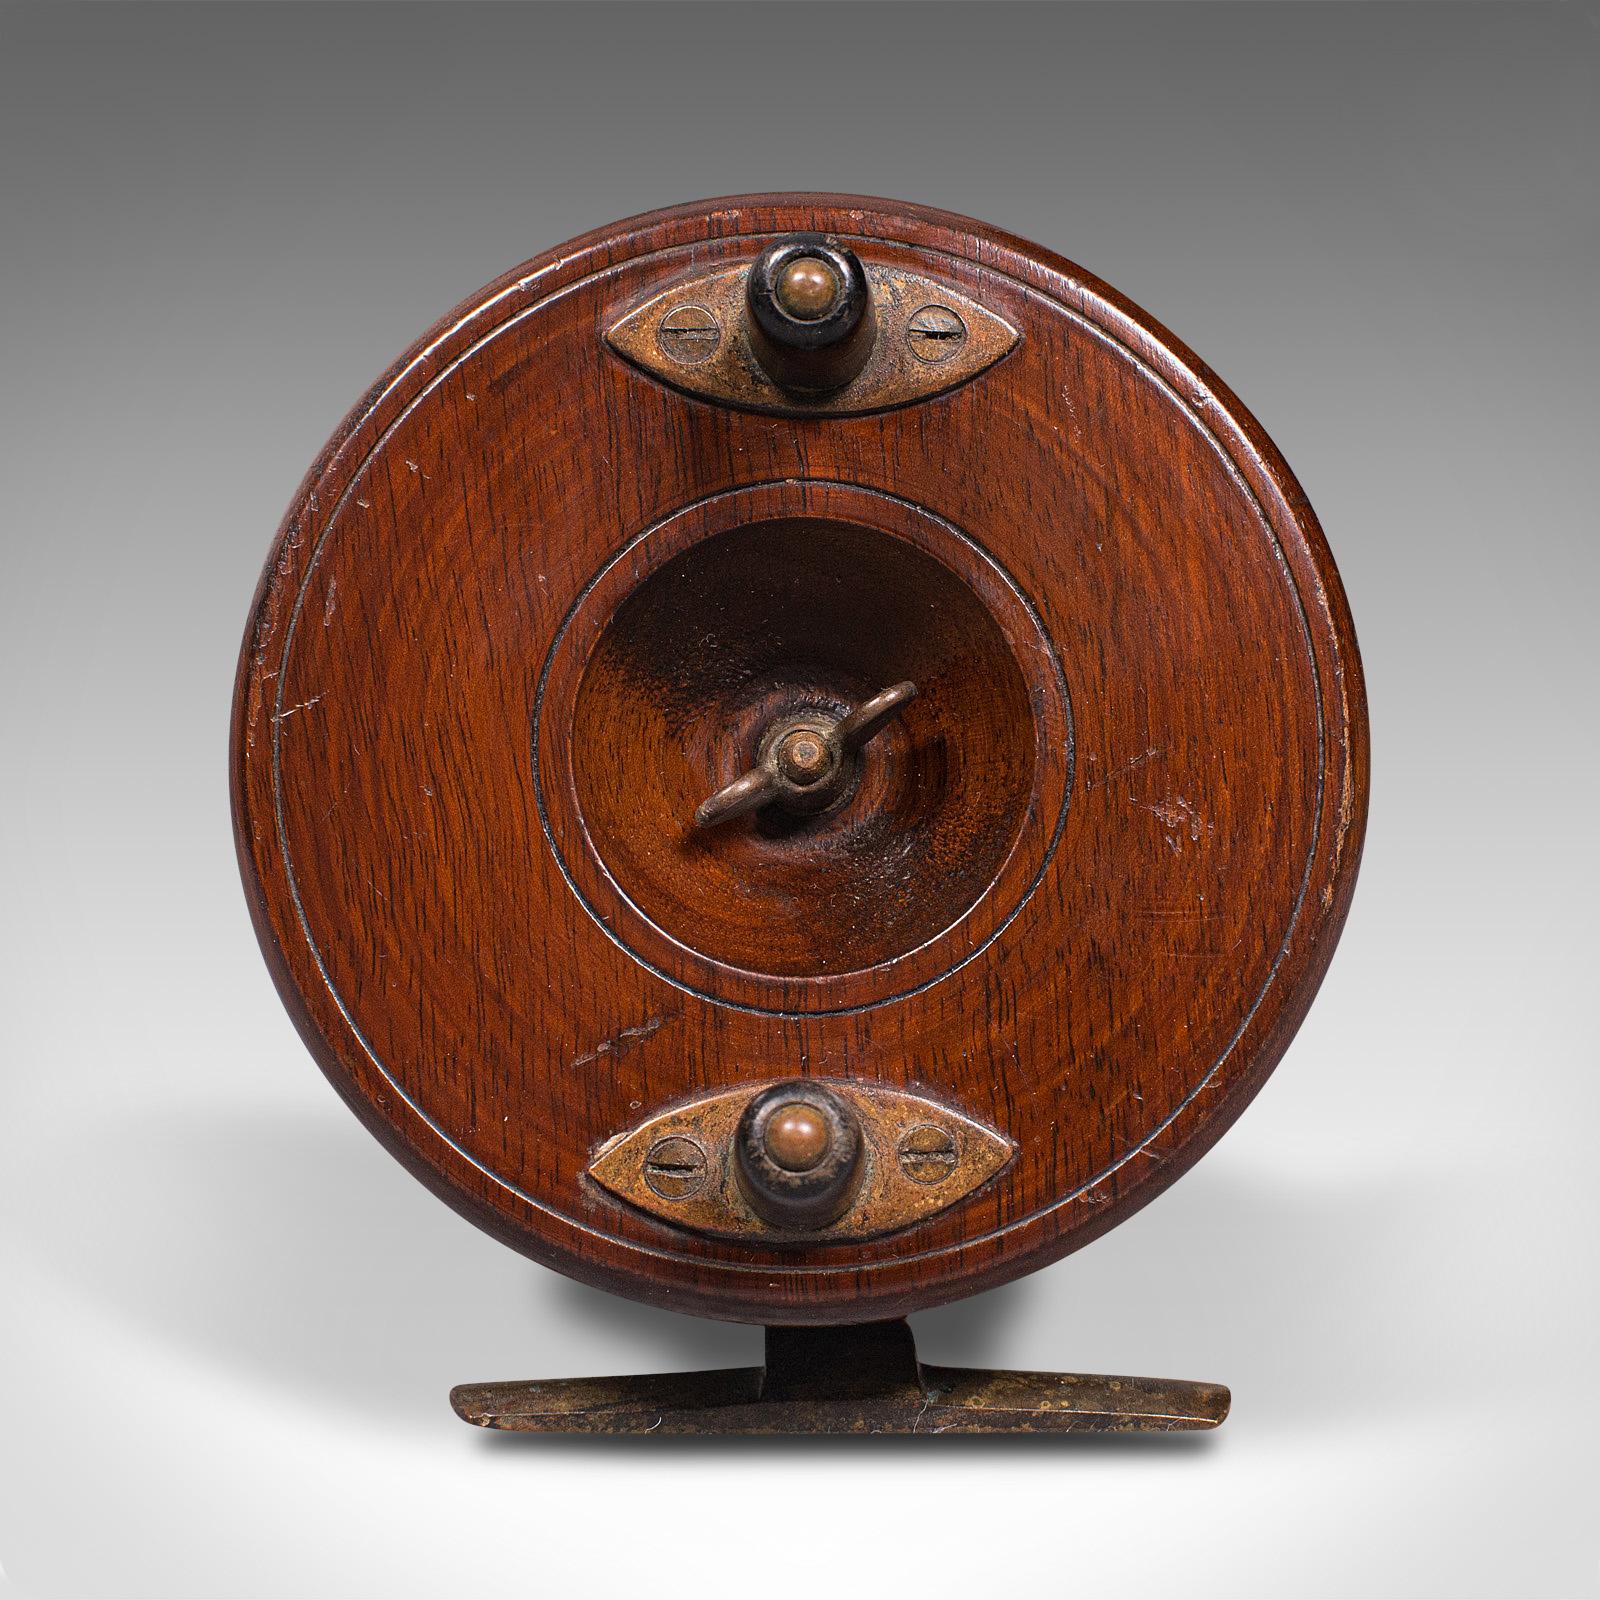 This is an antique starback fishing reel. An English, mahogany and brass decorative 4